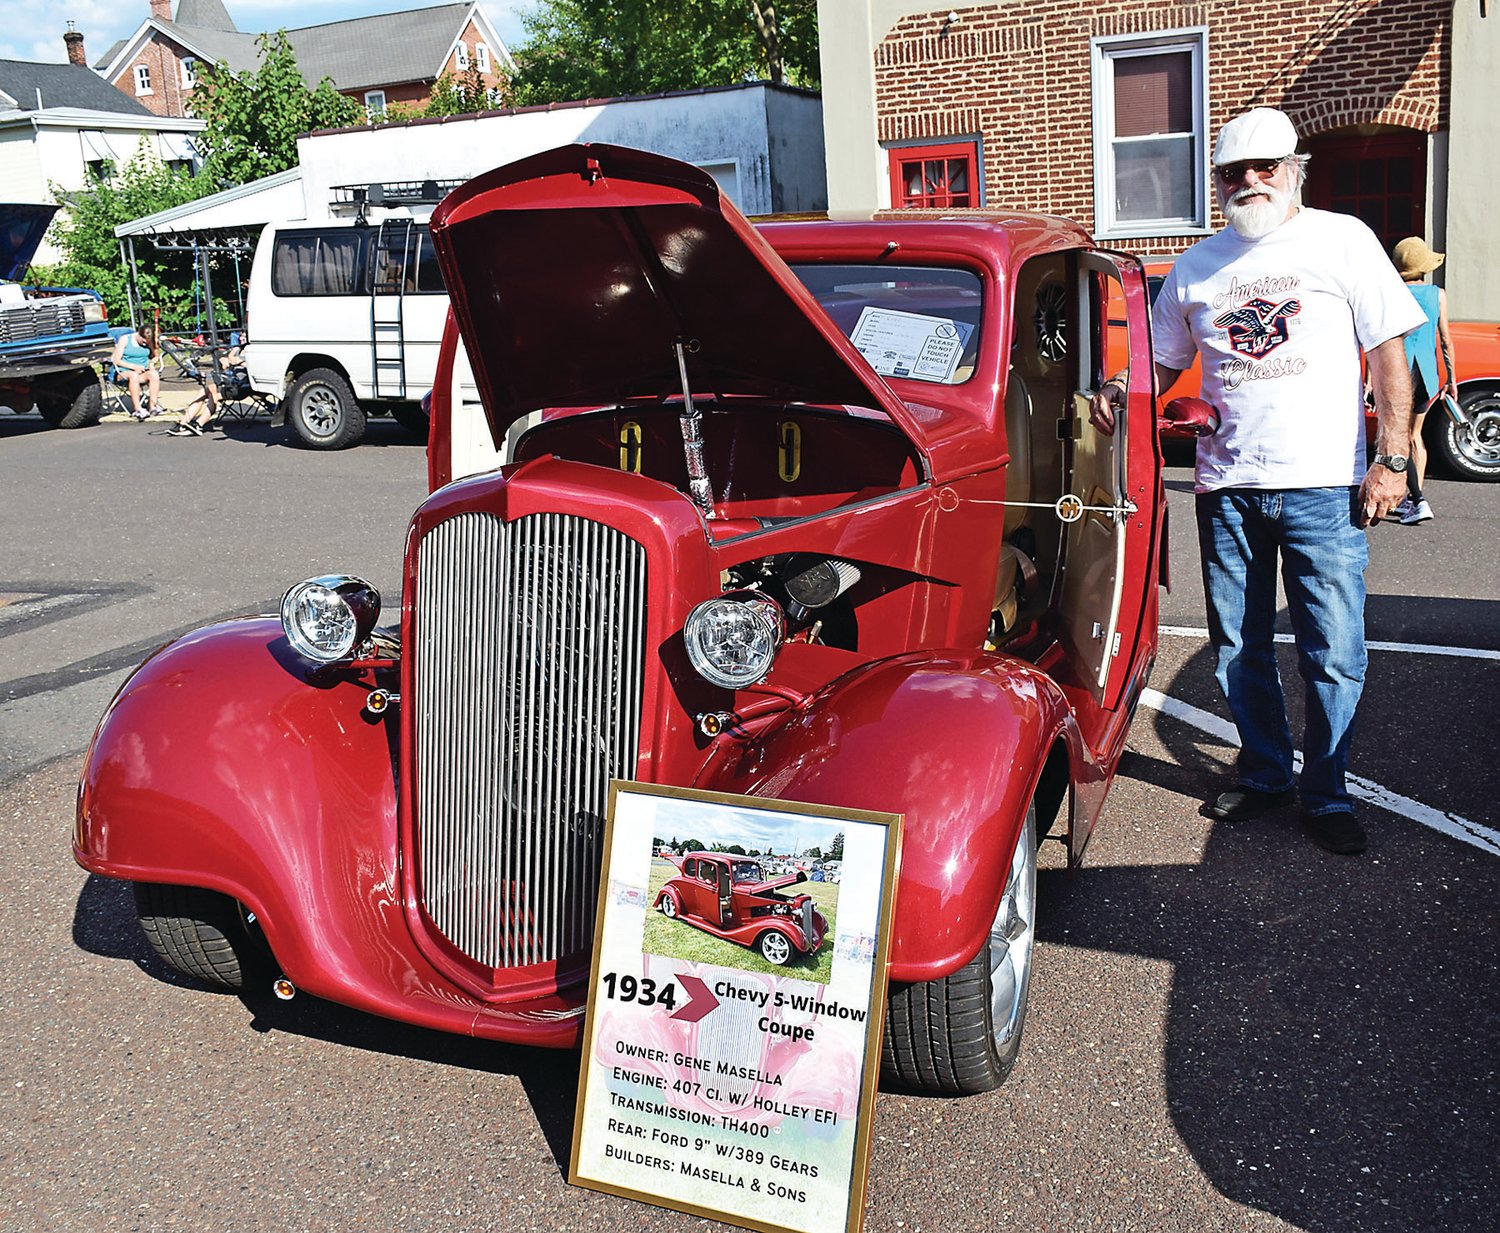 A Chevy 1934 owned by Gene Masella of Warminster.